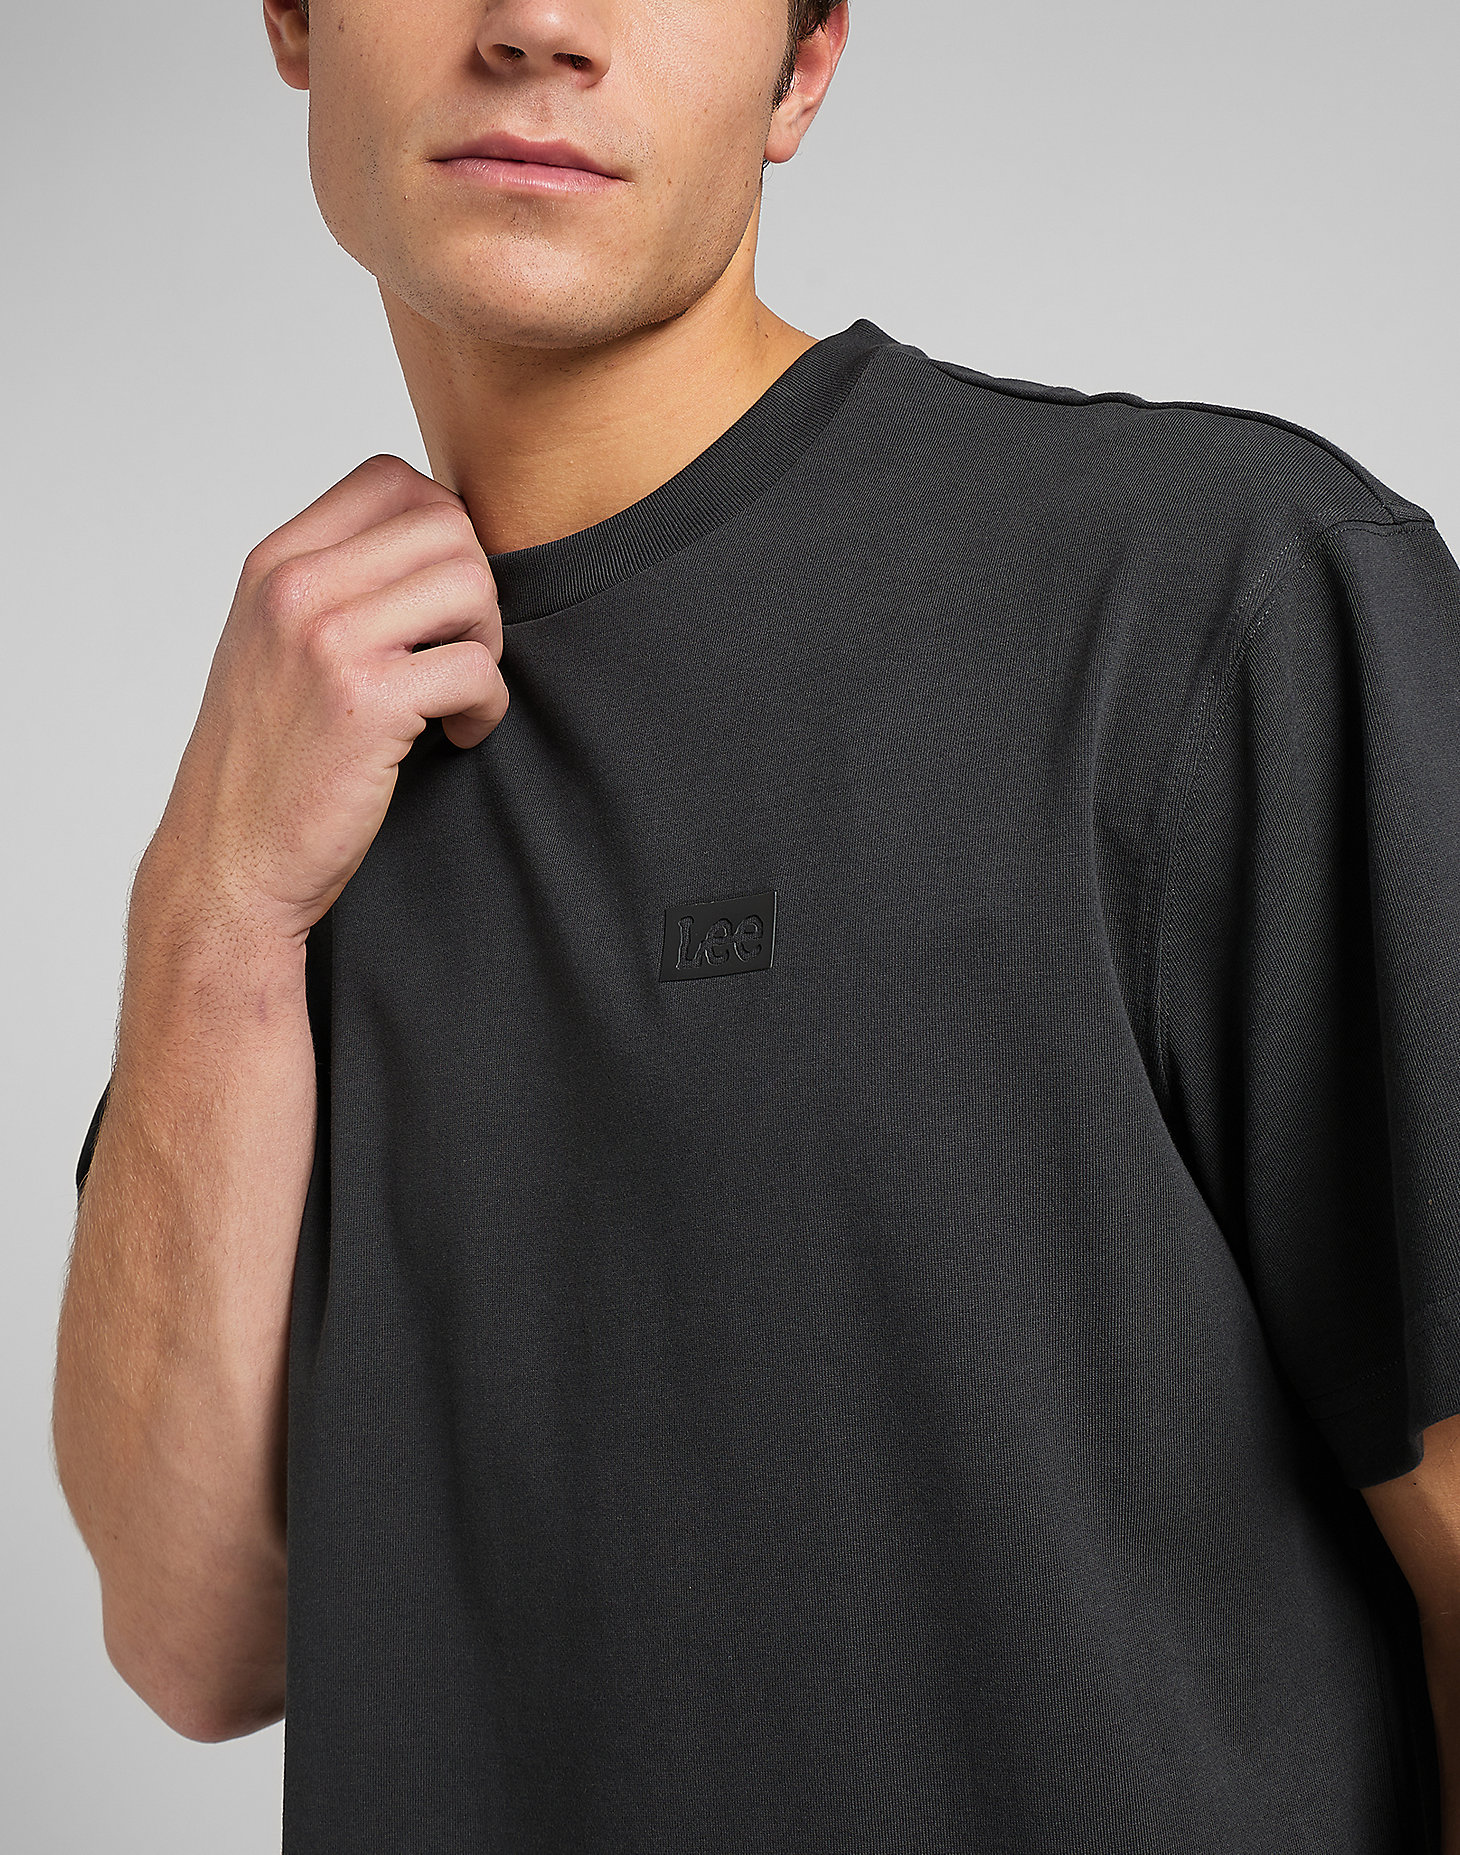 Core Loose Tee in Washed Black alternative view 6